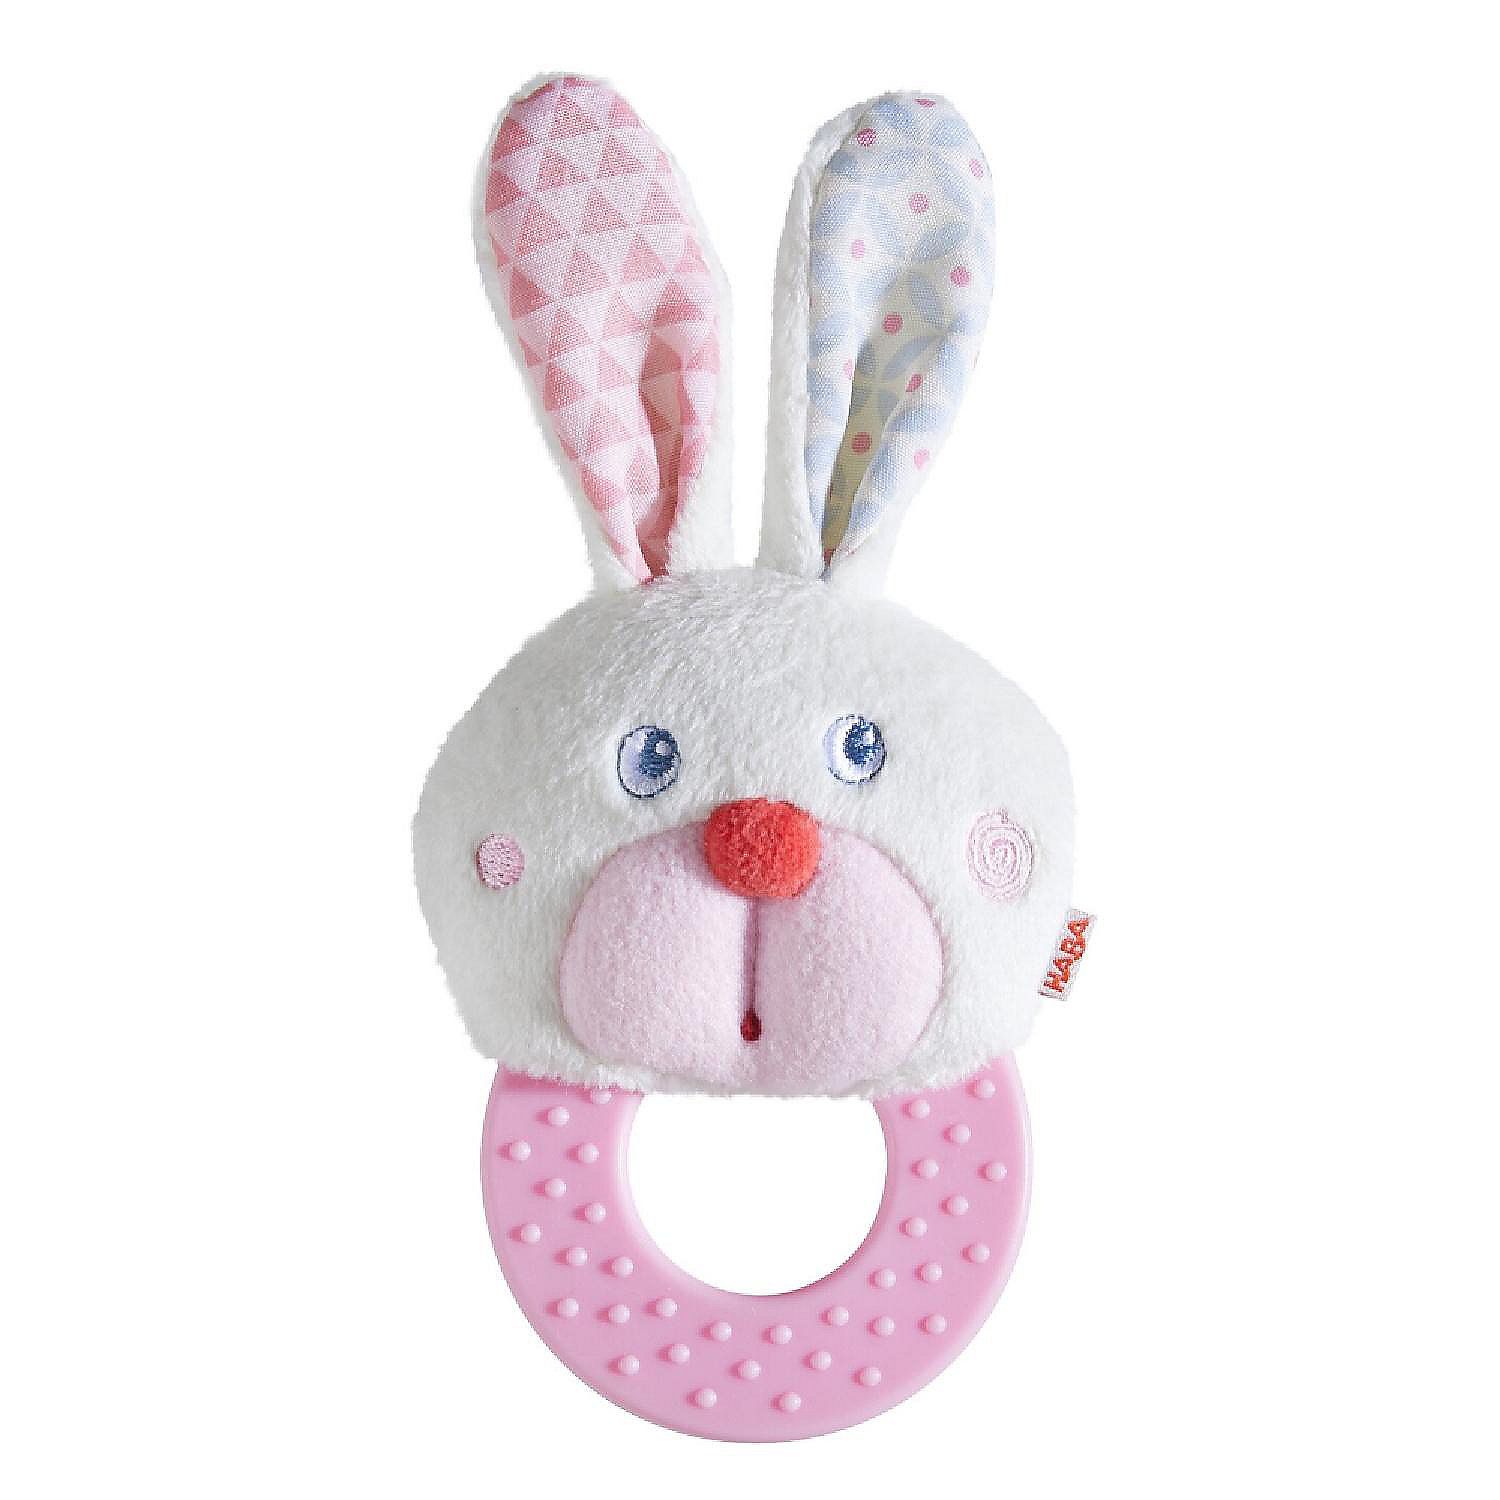 HABA Chomp Champ Bunny Teether with Crinkle Ears and Plastic Teething Ring for Babies from Birth and Up 